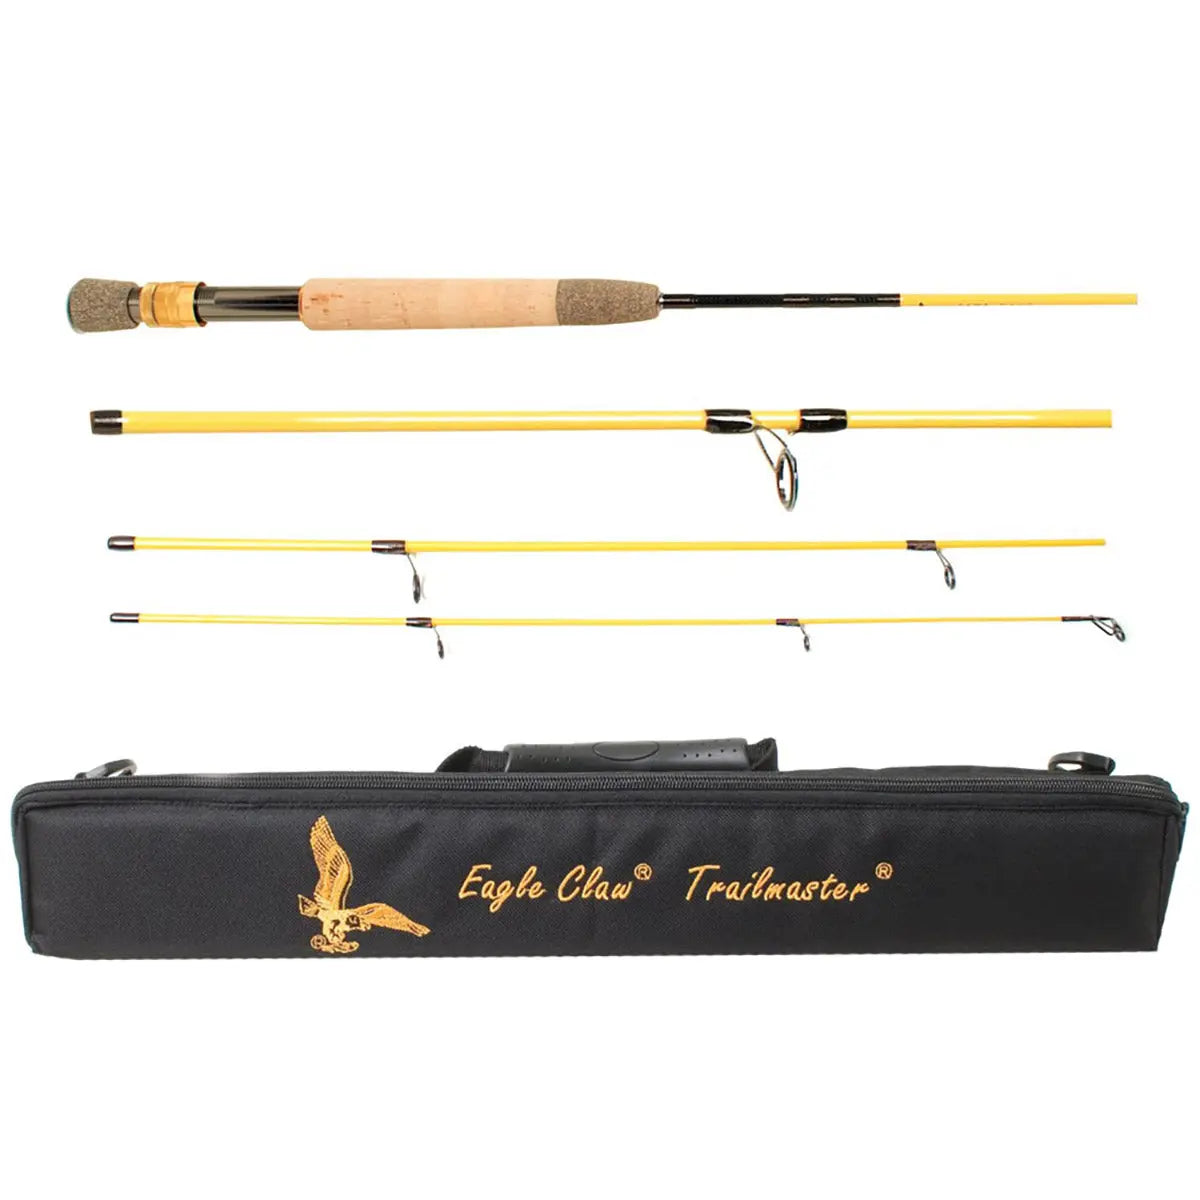 Eagle Claw 7'6" Trailmaster Travel Spin/Fly Fishing Rod Eagle Claw